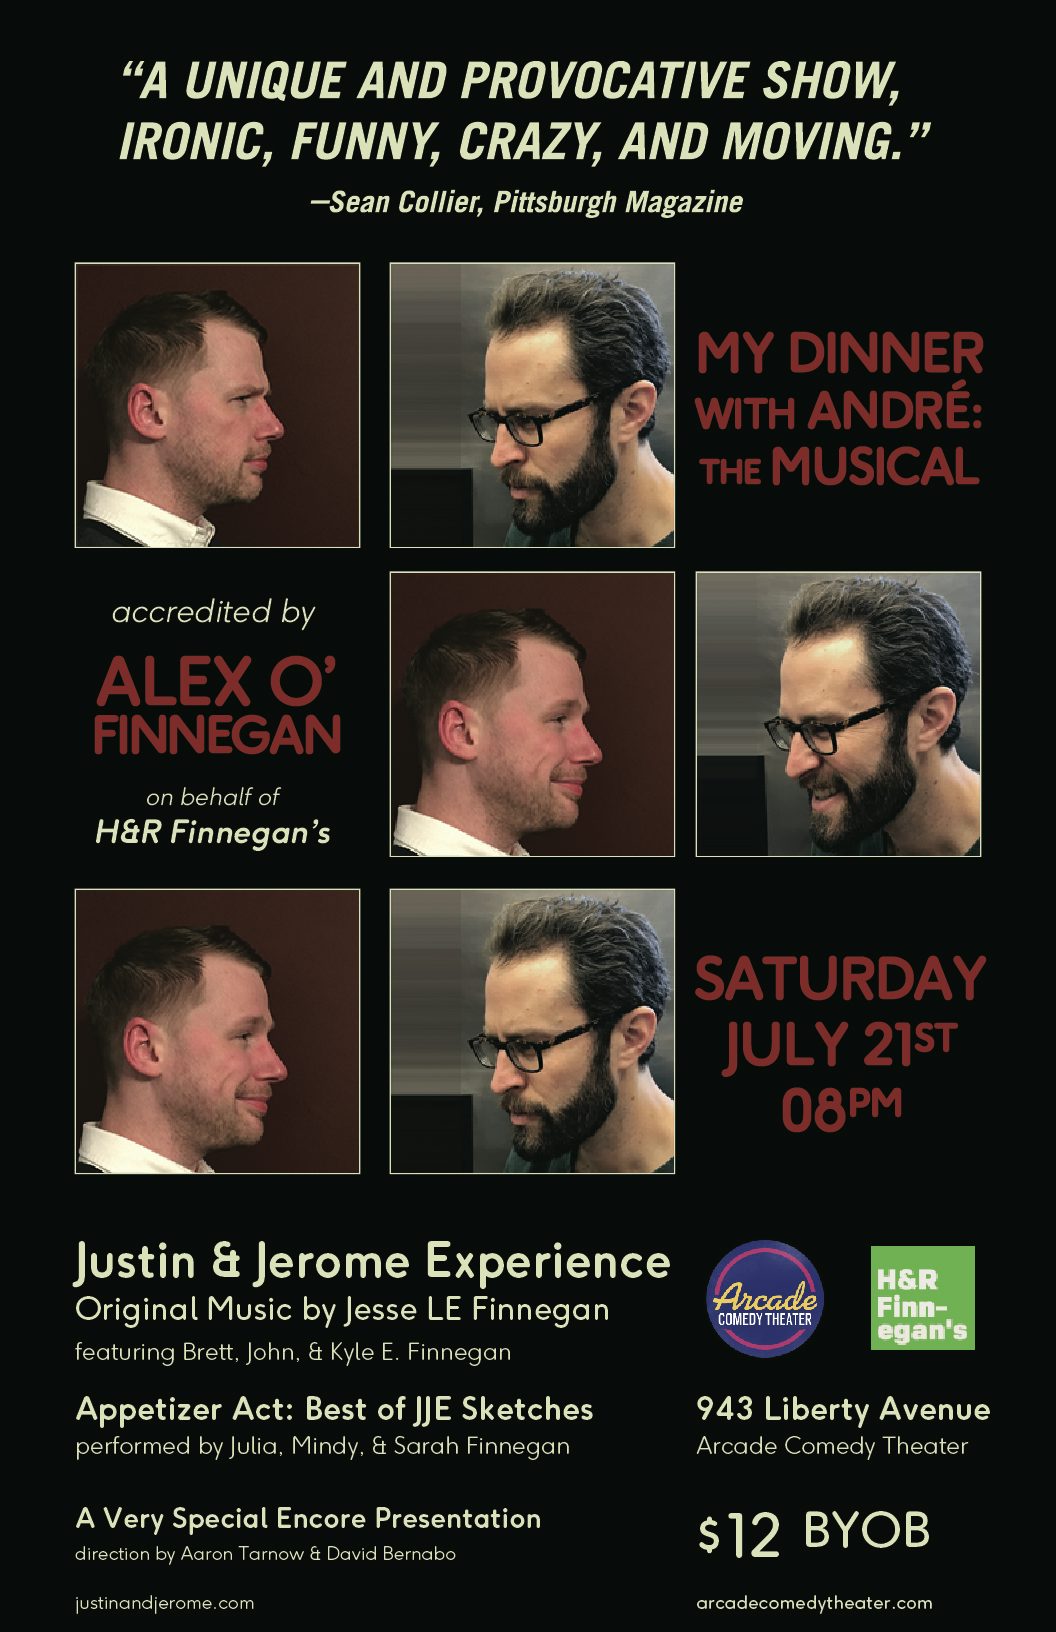 A show poster that mimics the original film poster for “My Dinner with André.” In multiple blocks there are separate pictures of Jerome and Justin looking at each other in various facial expressions. The top Jerome is looking very serious, only to be matched by Justin’s seriousness. The next row, they are both looking affable and smiling. The final row Jerome remains affable and Justin is now very serious. Throughout there are details about the show like the title, date, and sponsors.